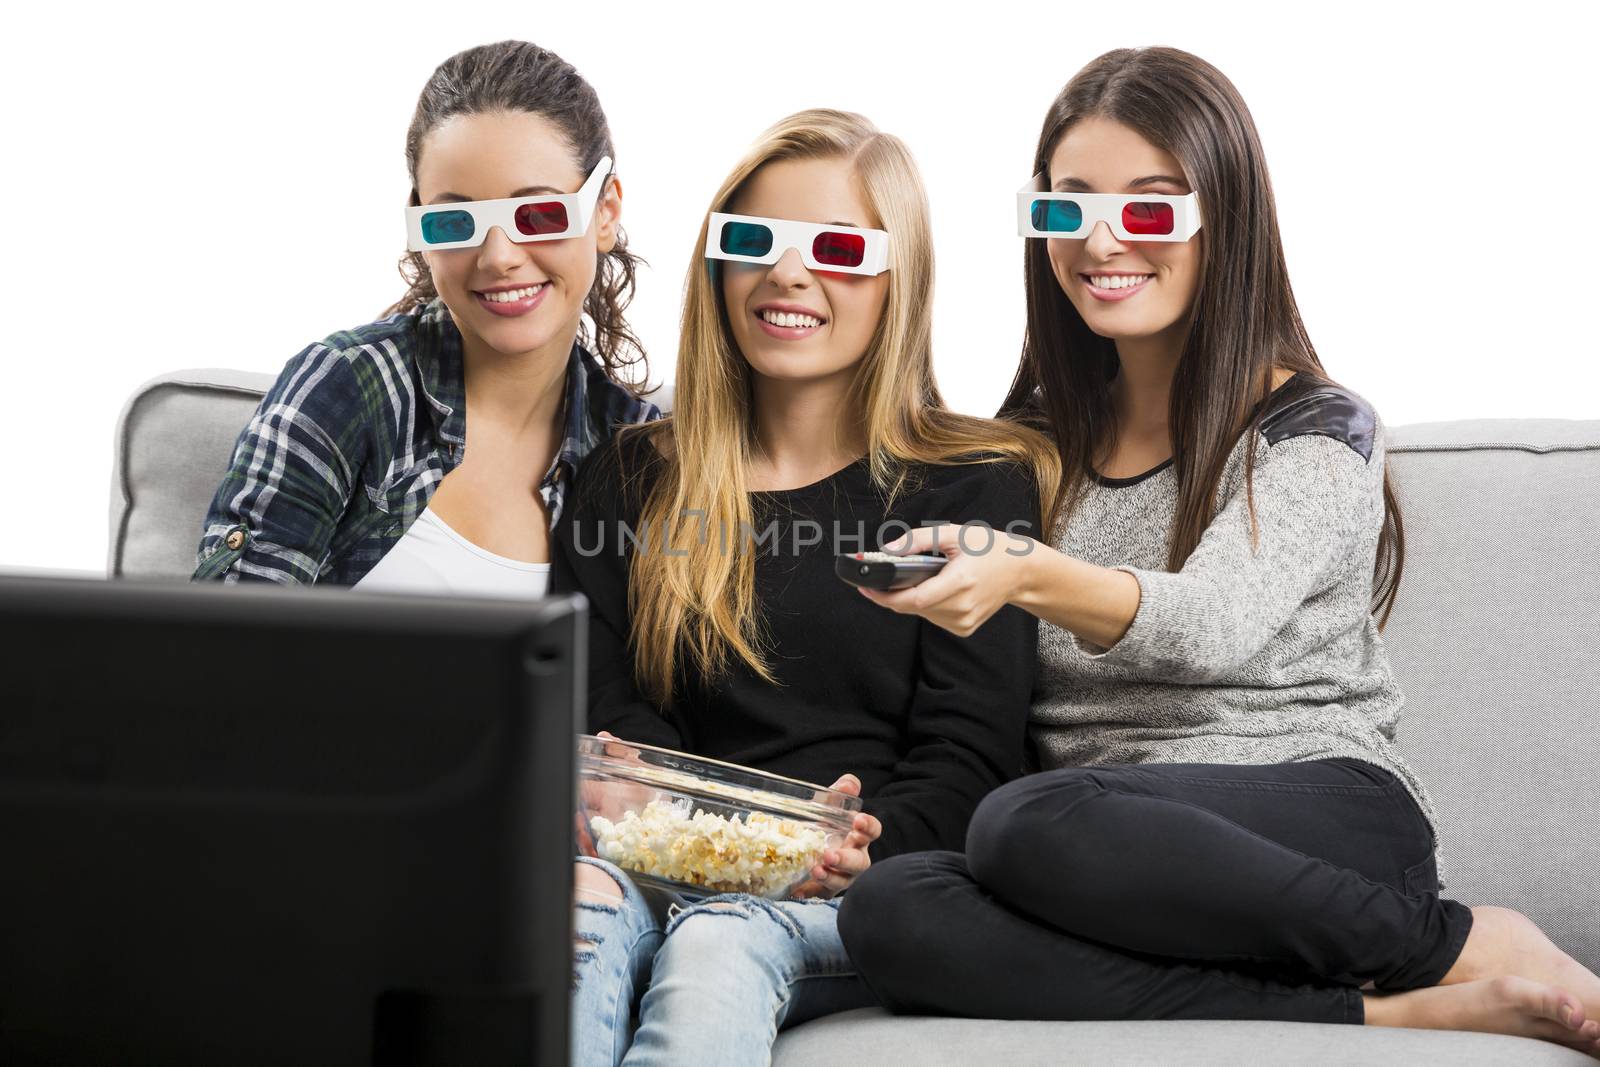 Girls watching 3D movies with popcorn